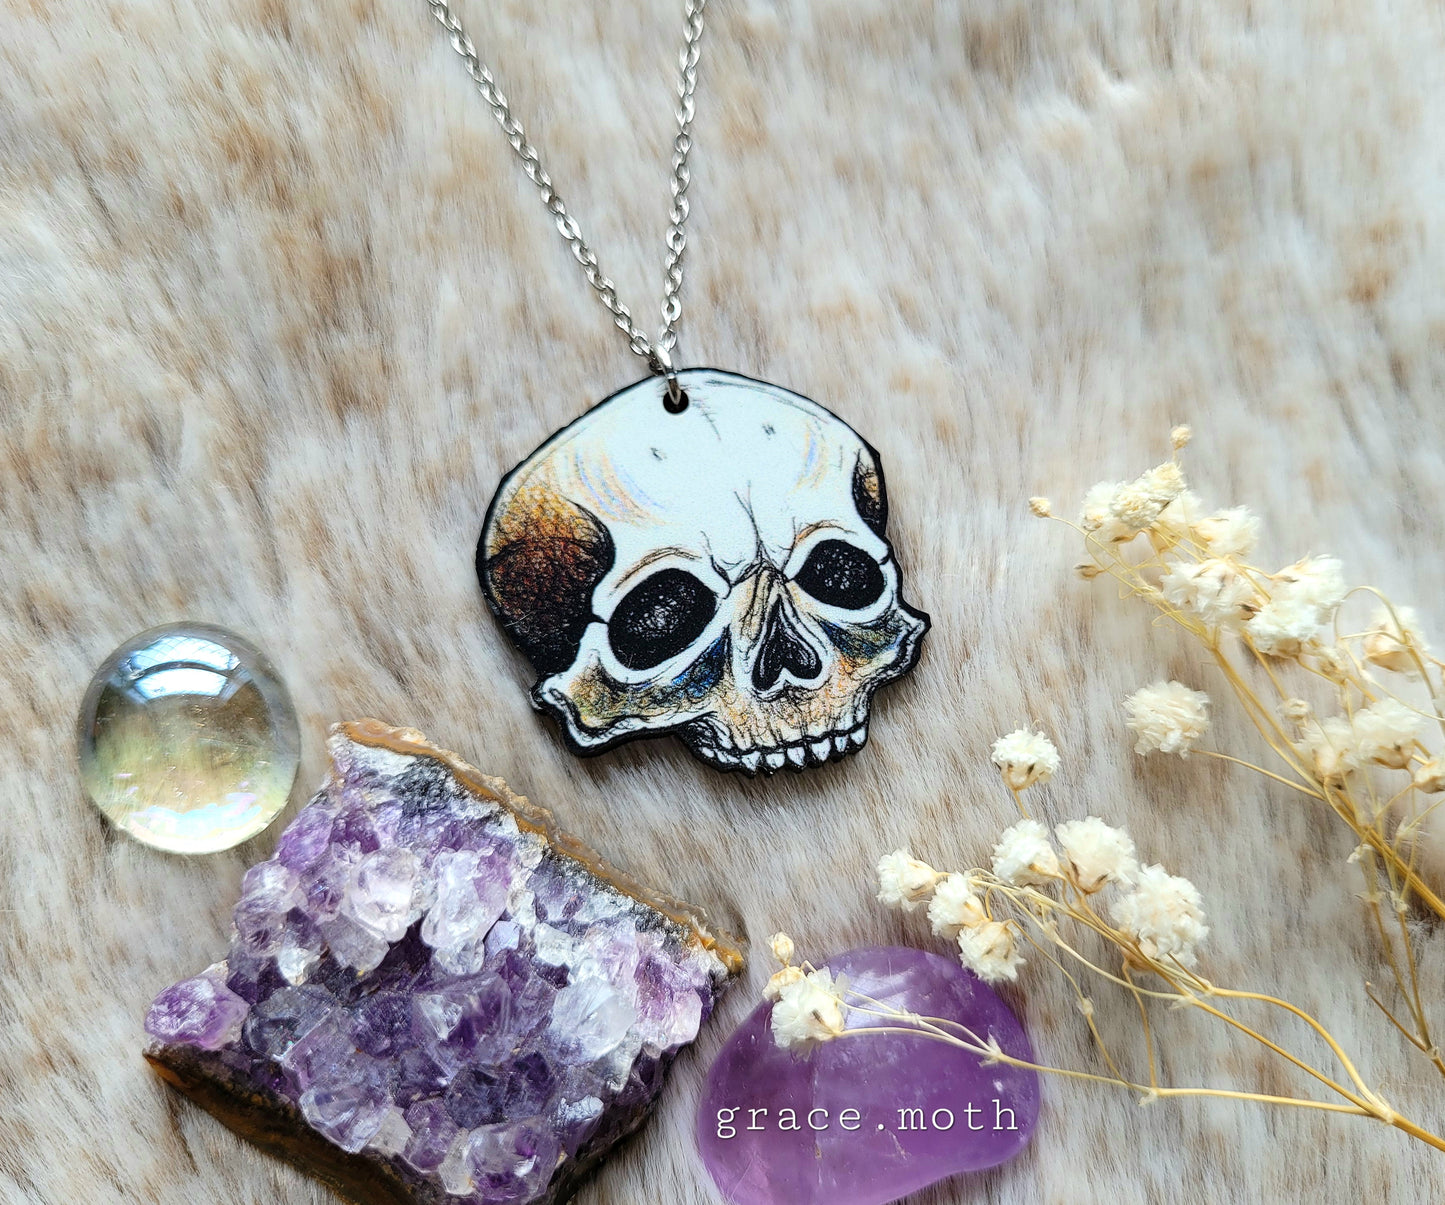 Skull illustrated necklace, responsibly sourced cherry wood, chain options available, by Grace Moth